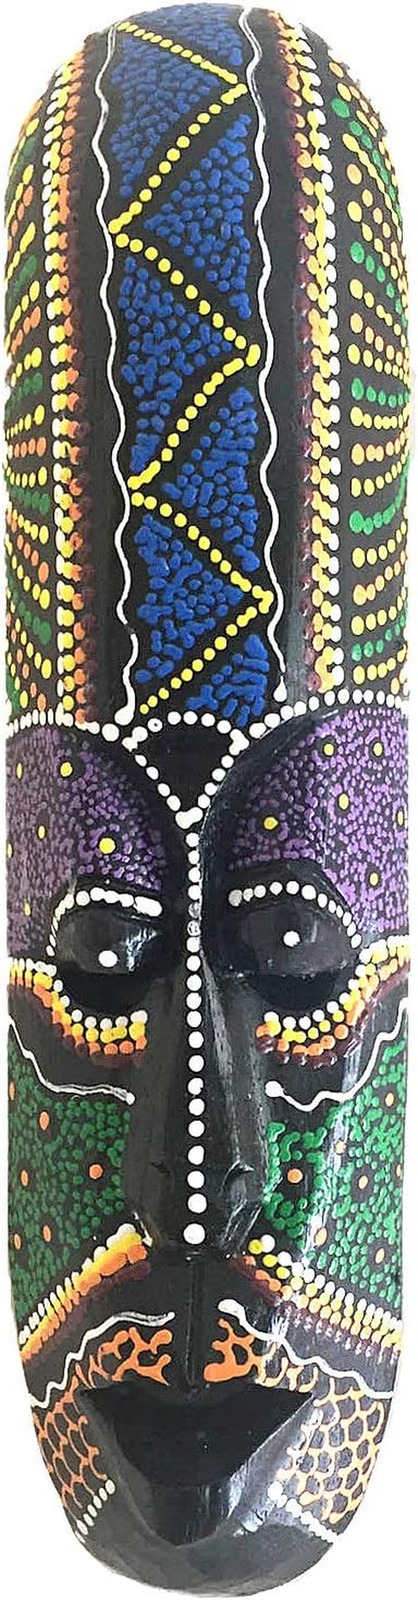 African Mask Lucky in Love Aboriginal Style Hand Painted Wooden Mask Wall Hangin